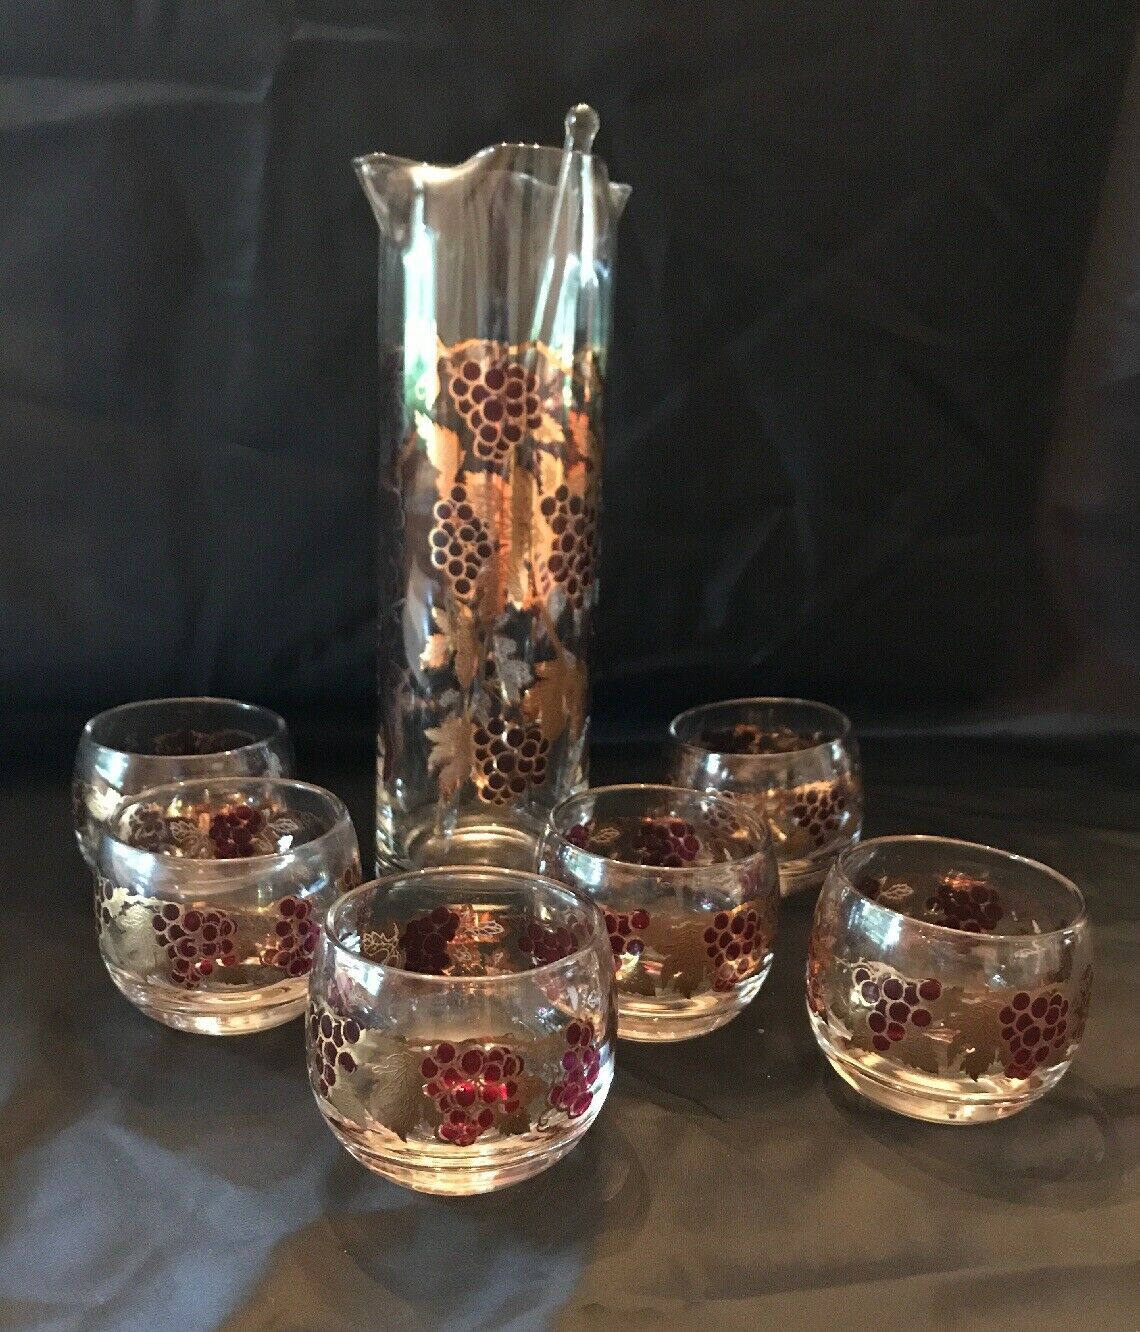 8 Pc Culver Martini 1 Pitcher 1 Stirrer 6 Roly Poly Glasses Red Grape Gold Vines